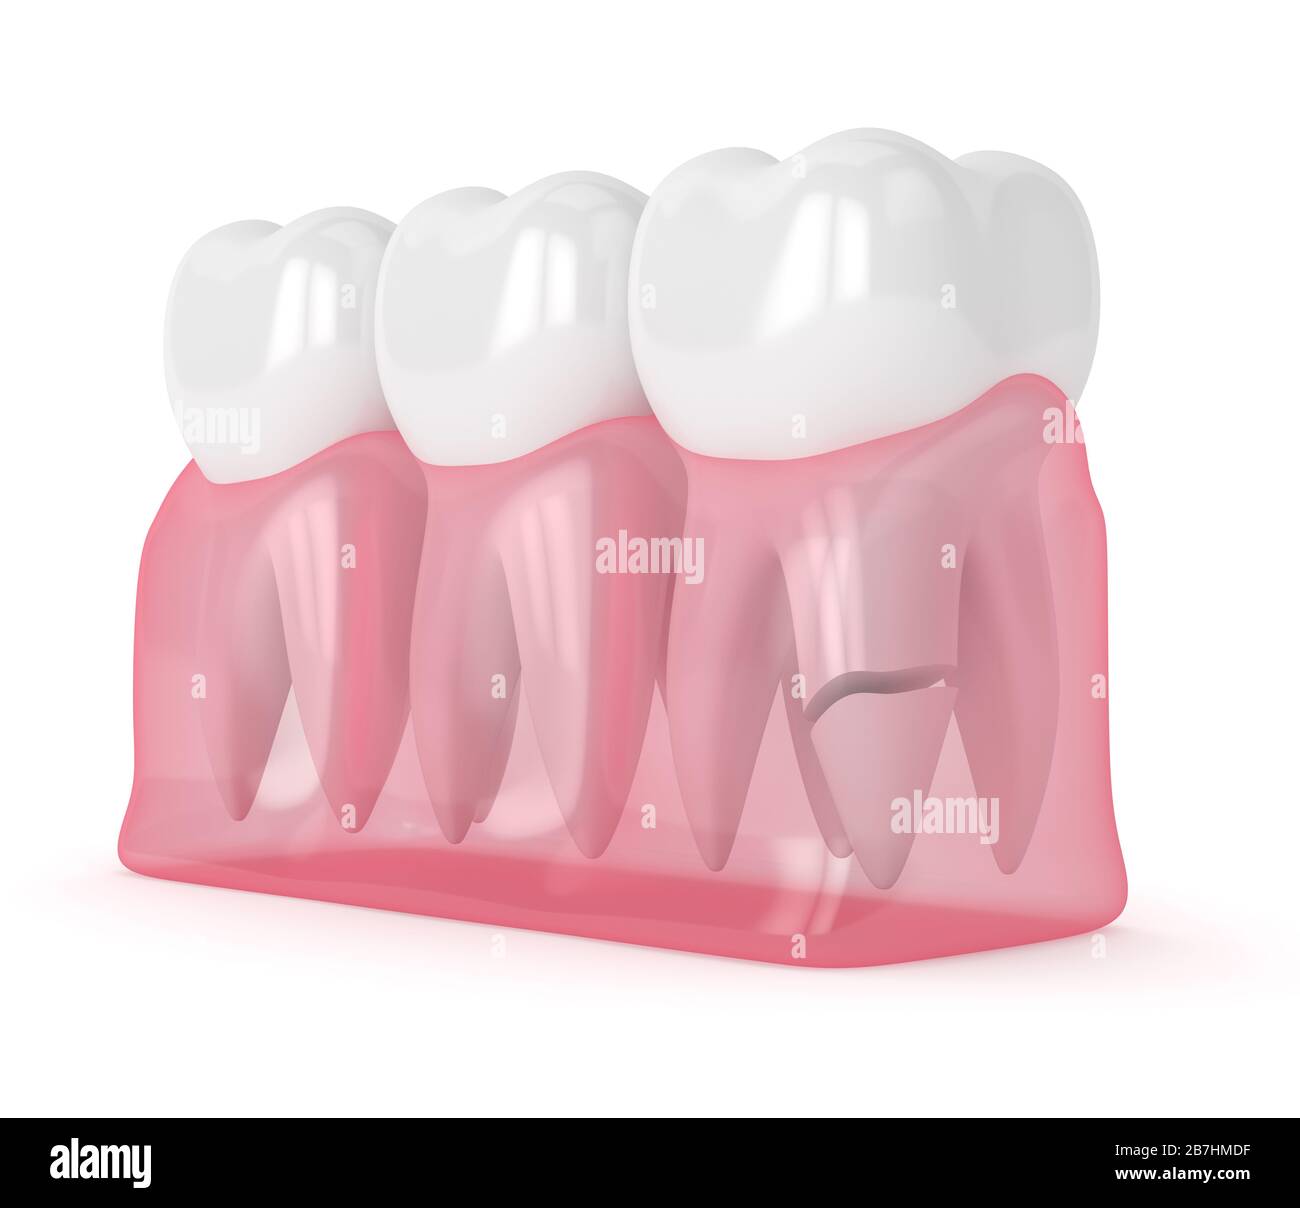 3d render of gums with cracked tooth root over white background. Different types of broken teeth concept. Stock Photo